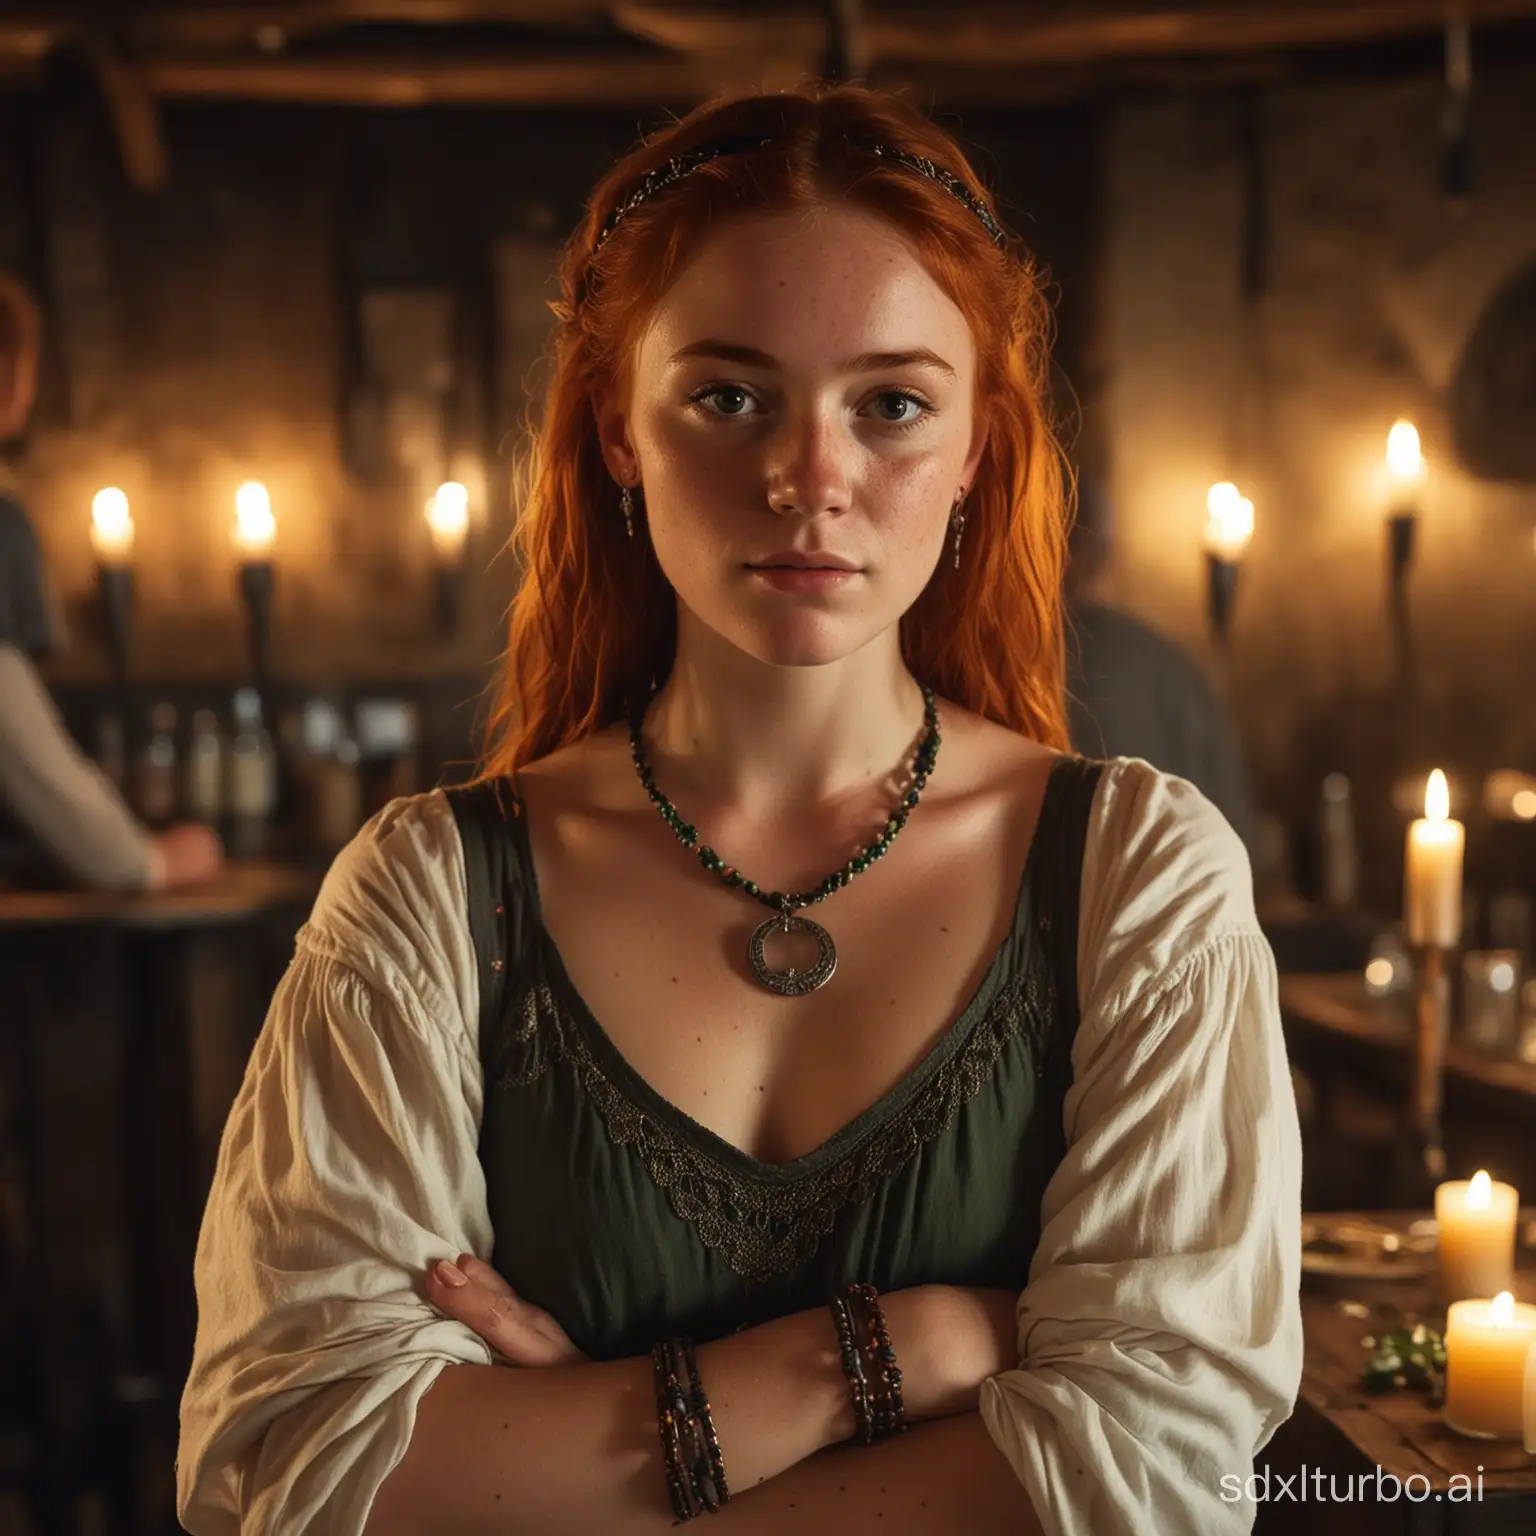 Portrait of a teenage redhead Irish girl with freckles in a crowded, messy medieval pub. She is wearing shaman-like bracelets, necklaces, and earrings, and is dressed in a way that reveals her small, sagging breasts and bare belly. The lighting is provided by candles and she has a thoughtful expression.